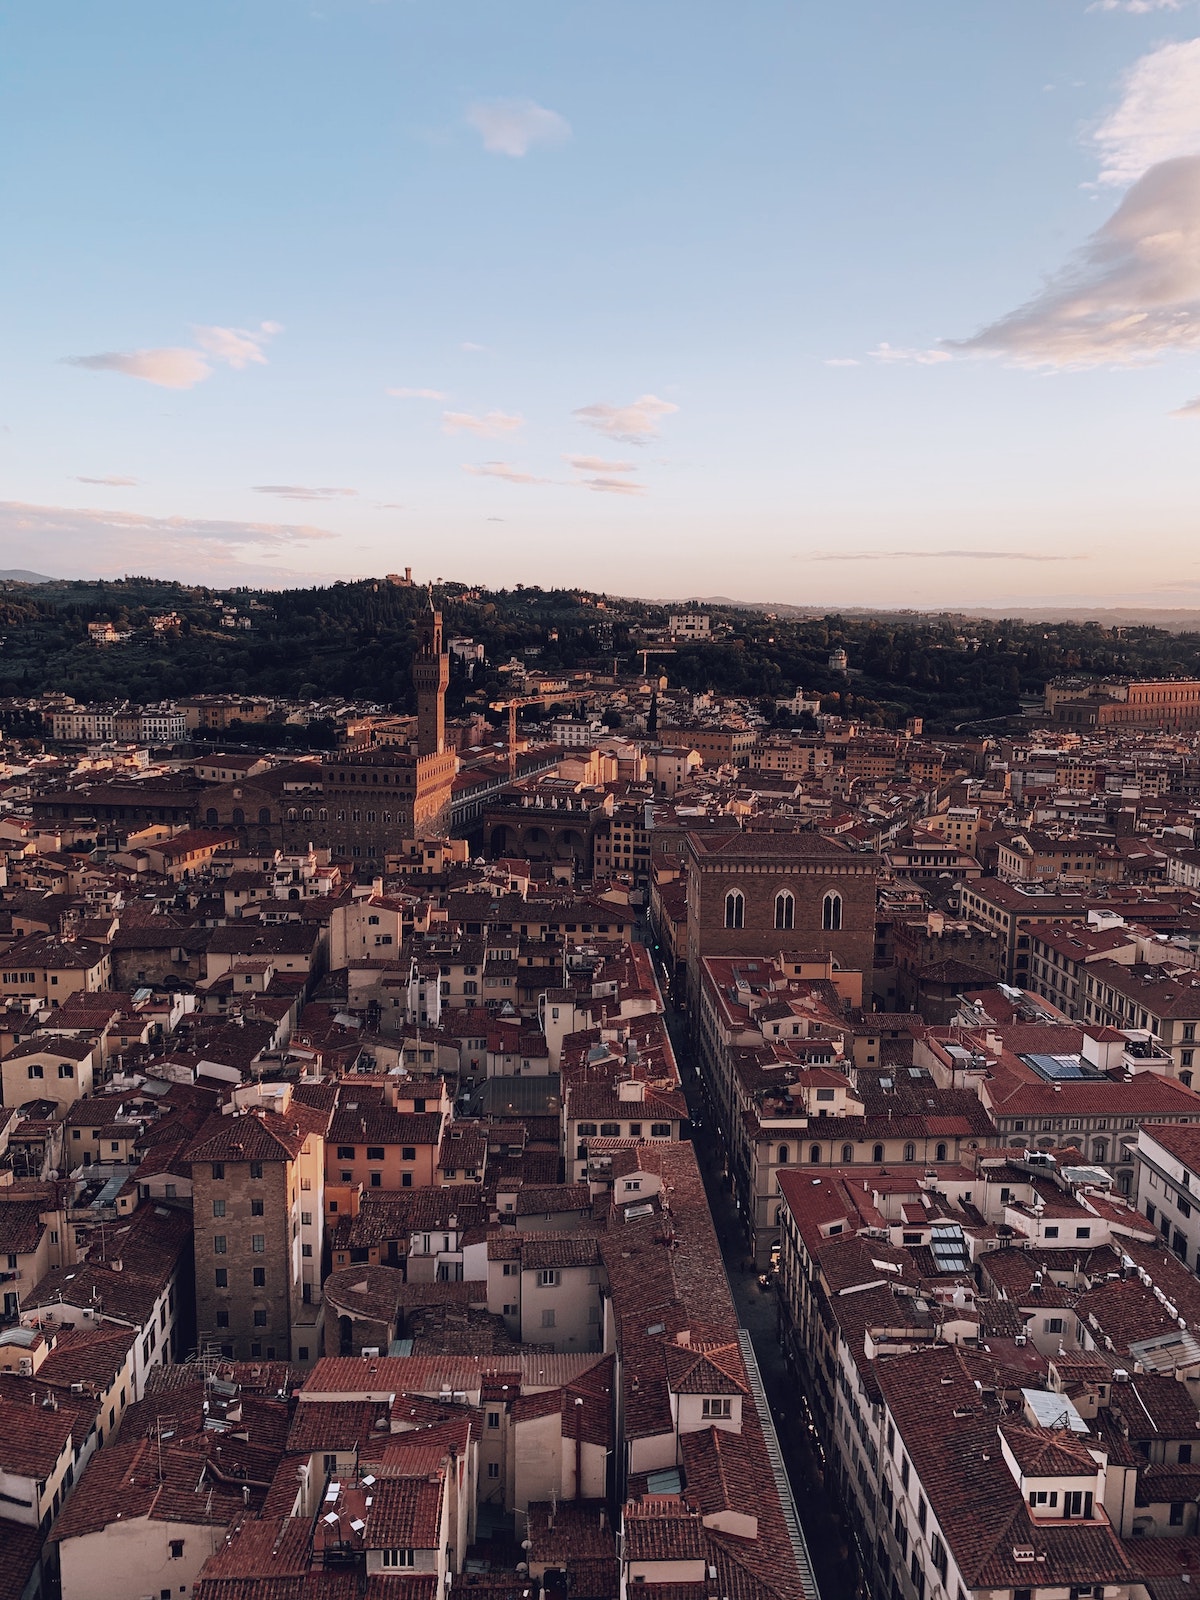 Aerial shot of the historic center of Florence, Italy at sunset